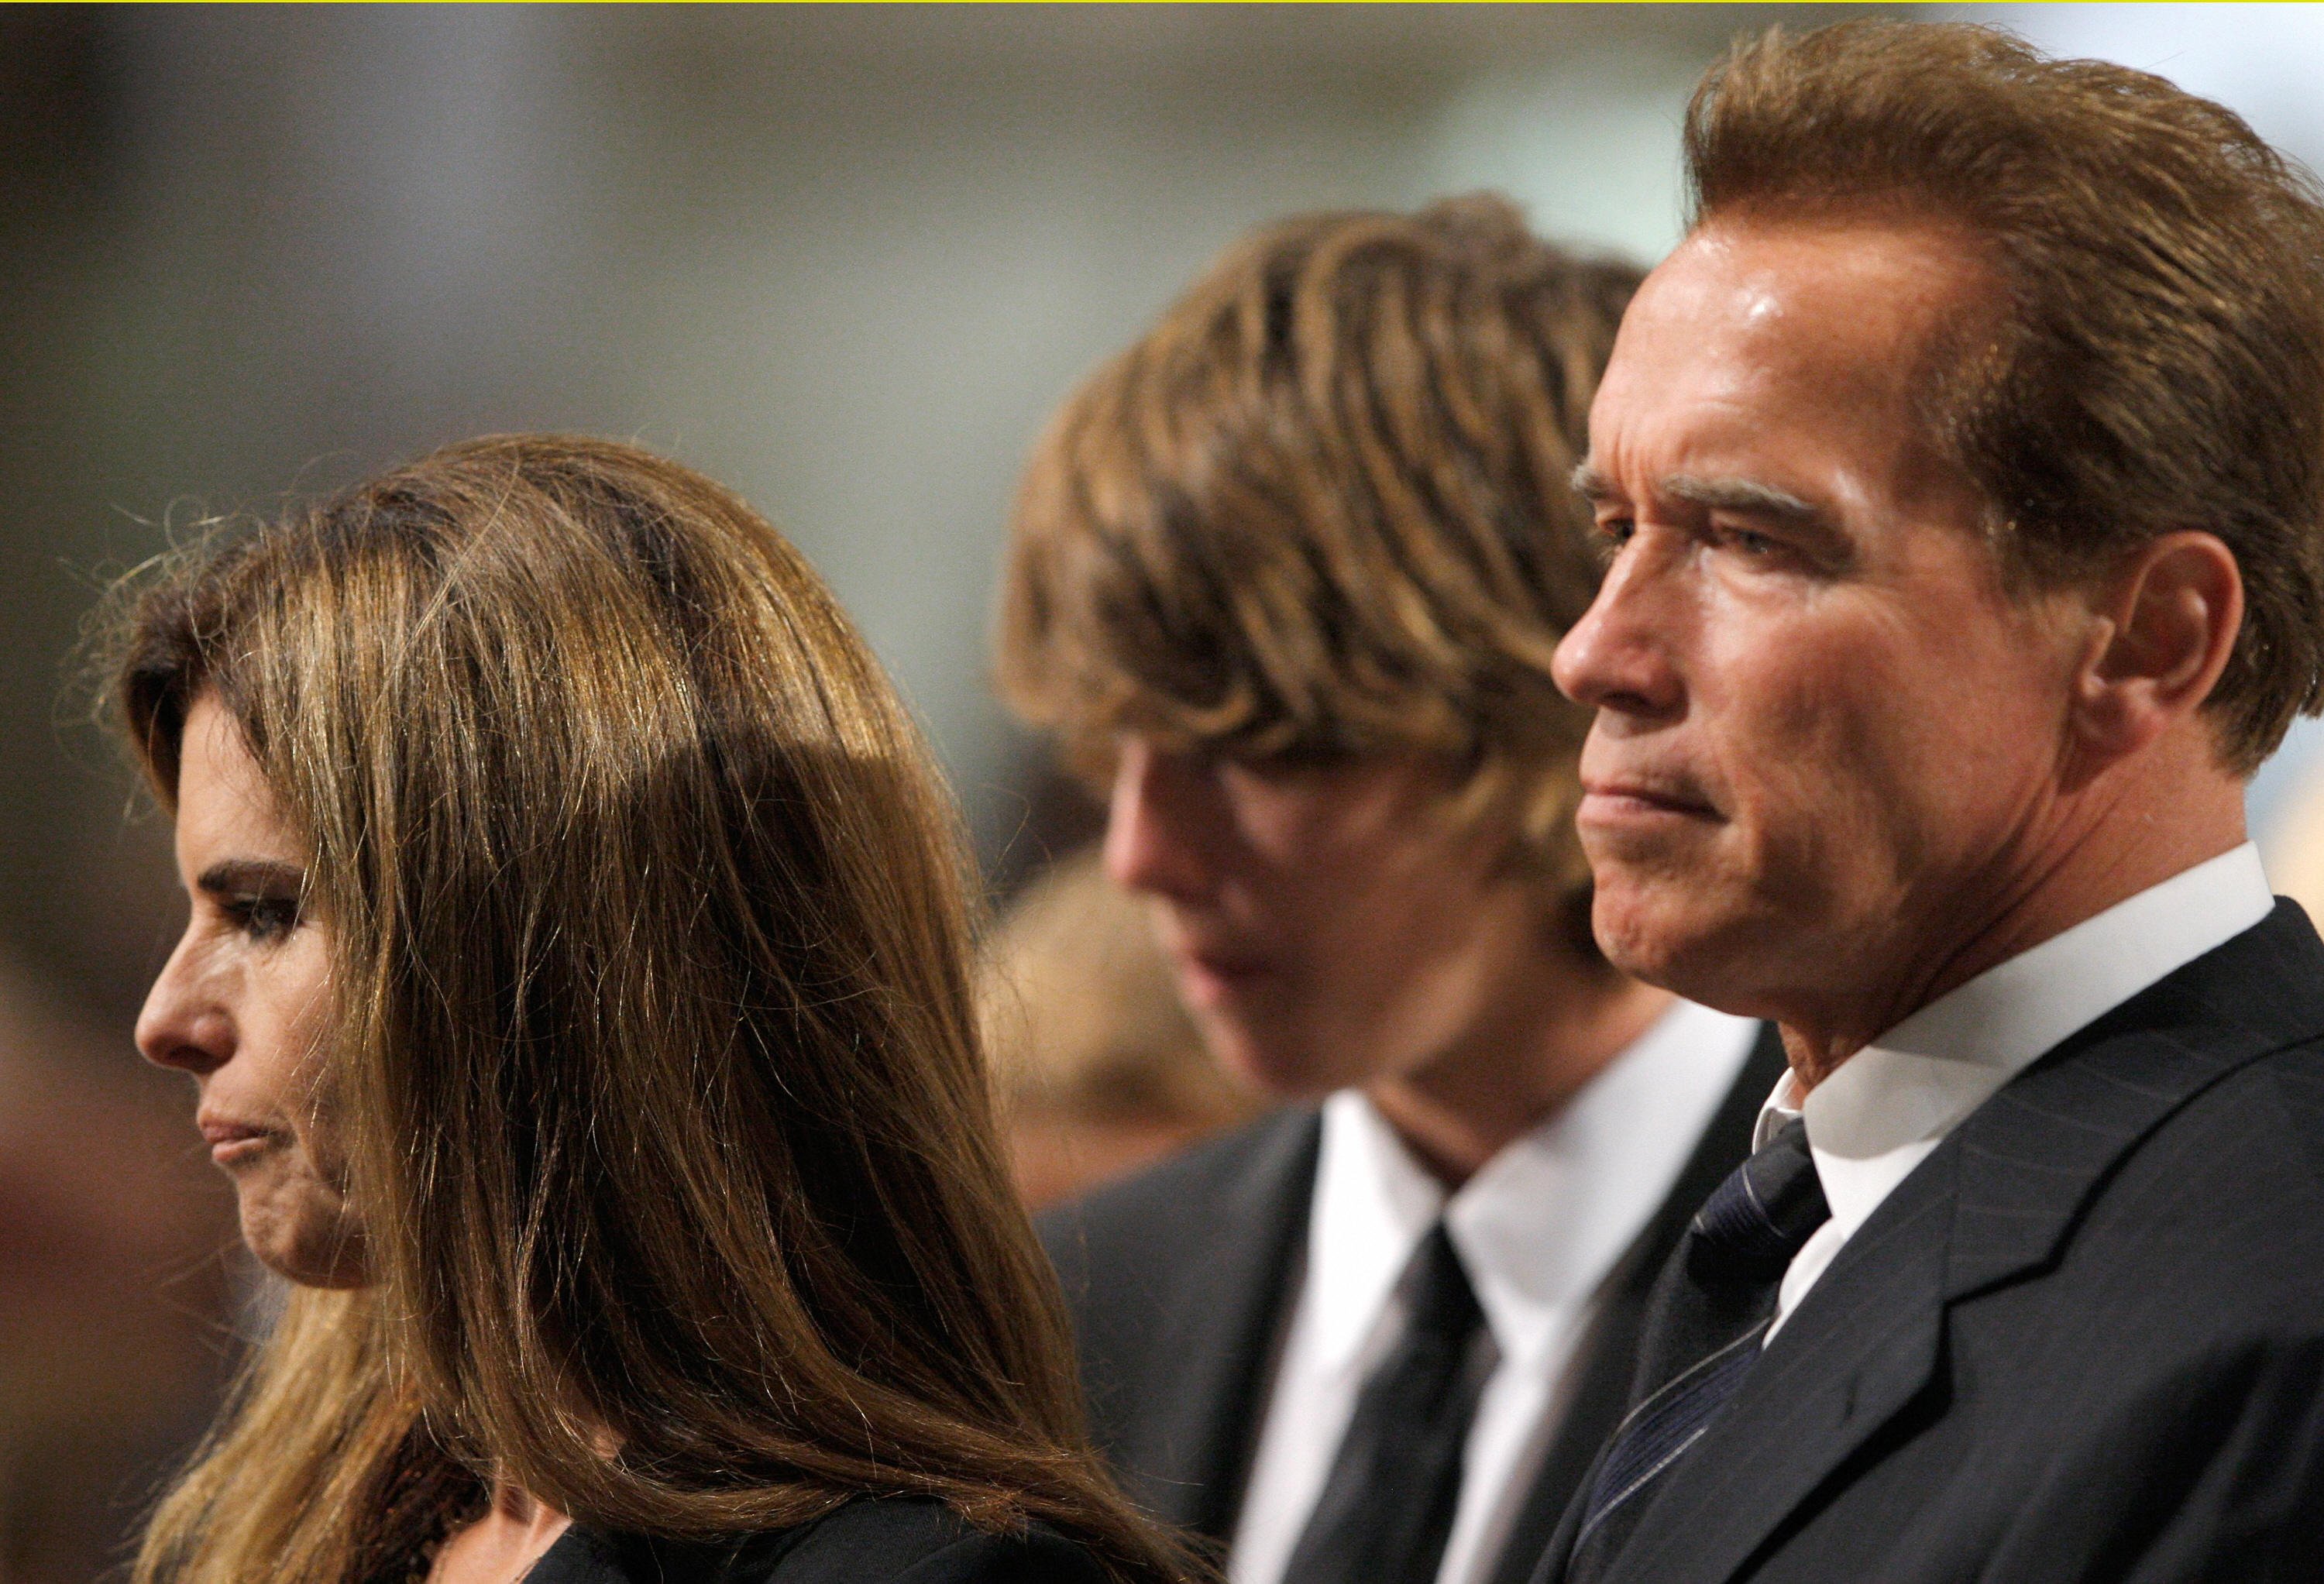 California First Lady Maria Shriver, niece of US Senator Edward Kennedy, her son Patrick and her husband, California Governor Arnold Schwarzenegger, attended funeral services for Ted Kennedy at the Basilica of Our Lady of Perpetual Help in Boston on August 29, 2009. | Source: Getty Images